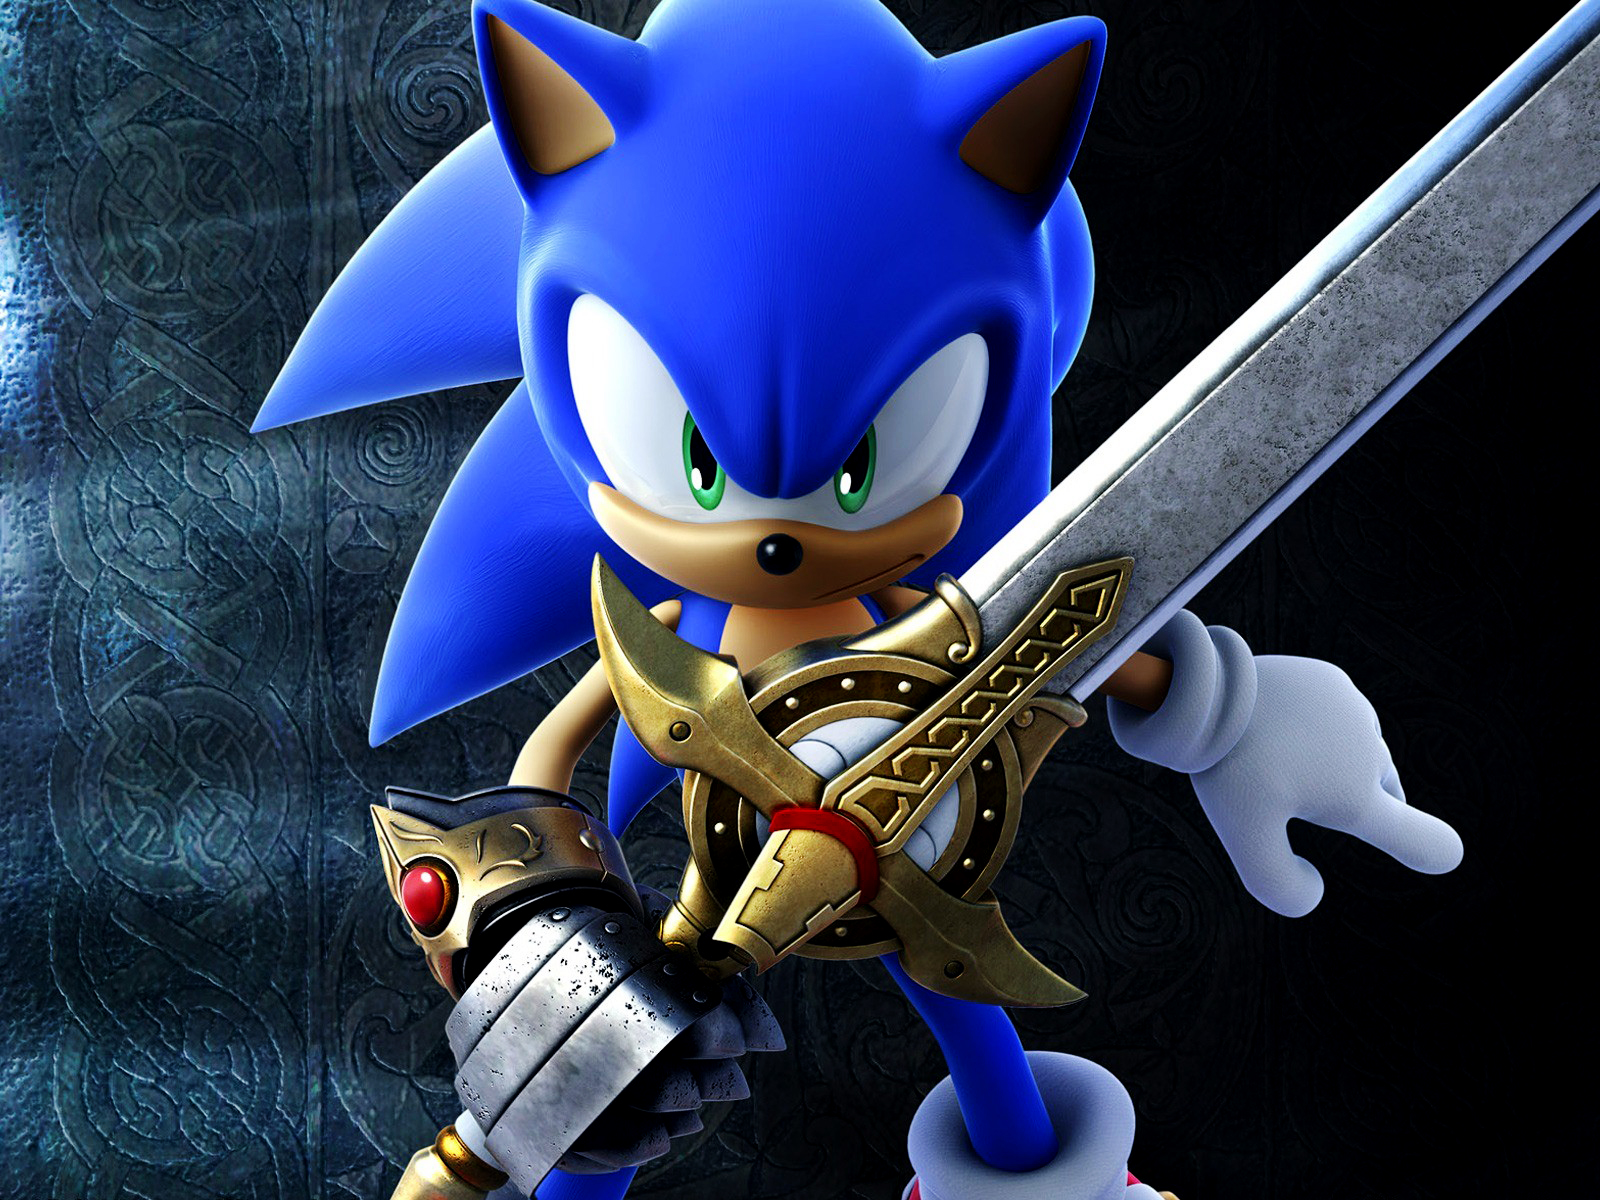 Sonic The Hedgehog HD Wallpapers | Wallpapers, Backgrounds, Images ...